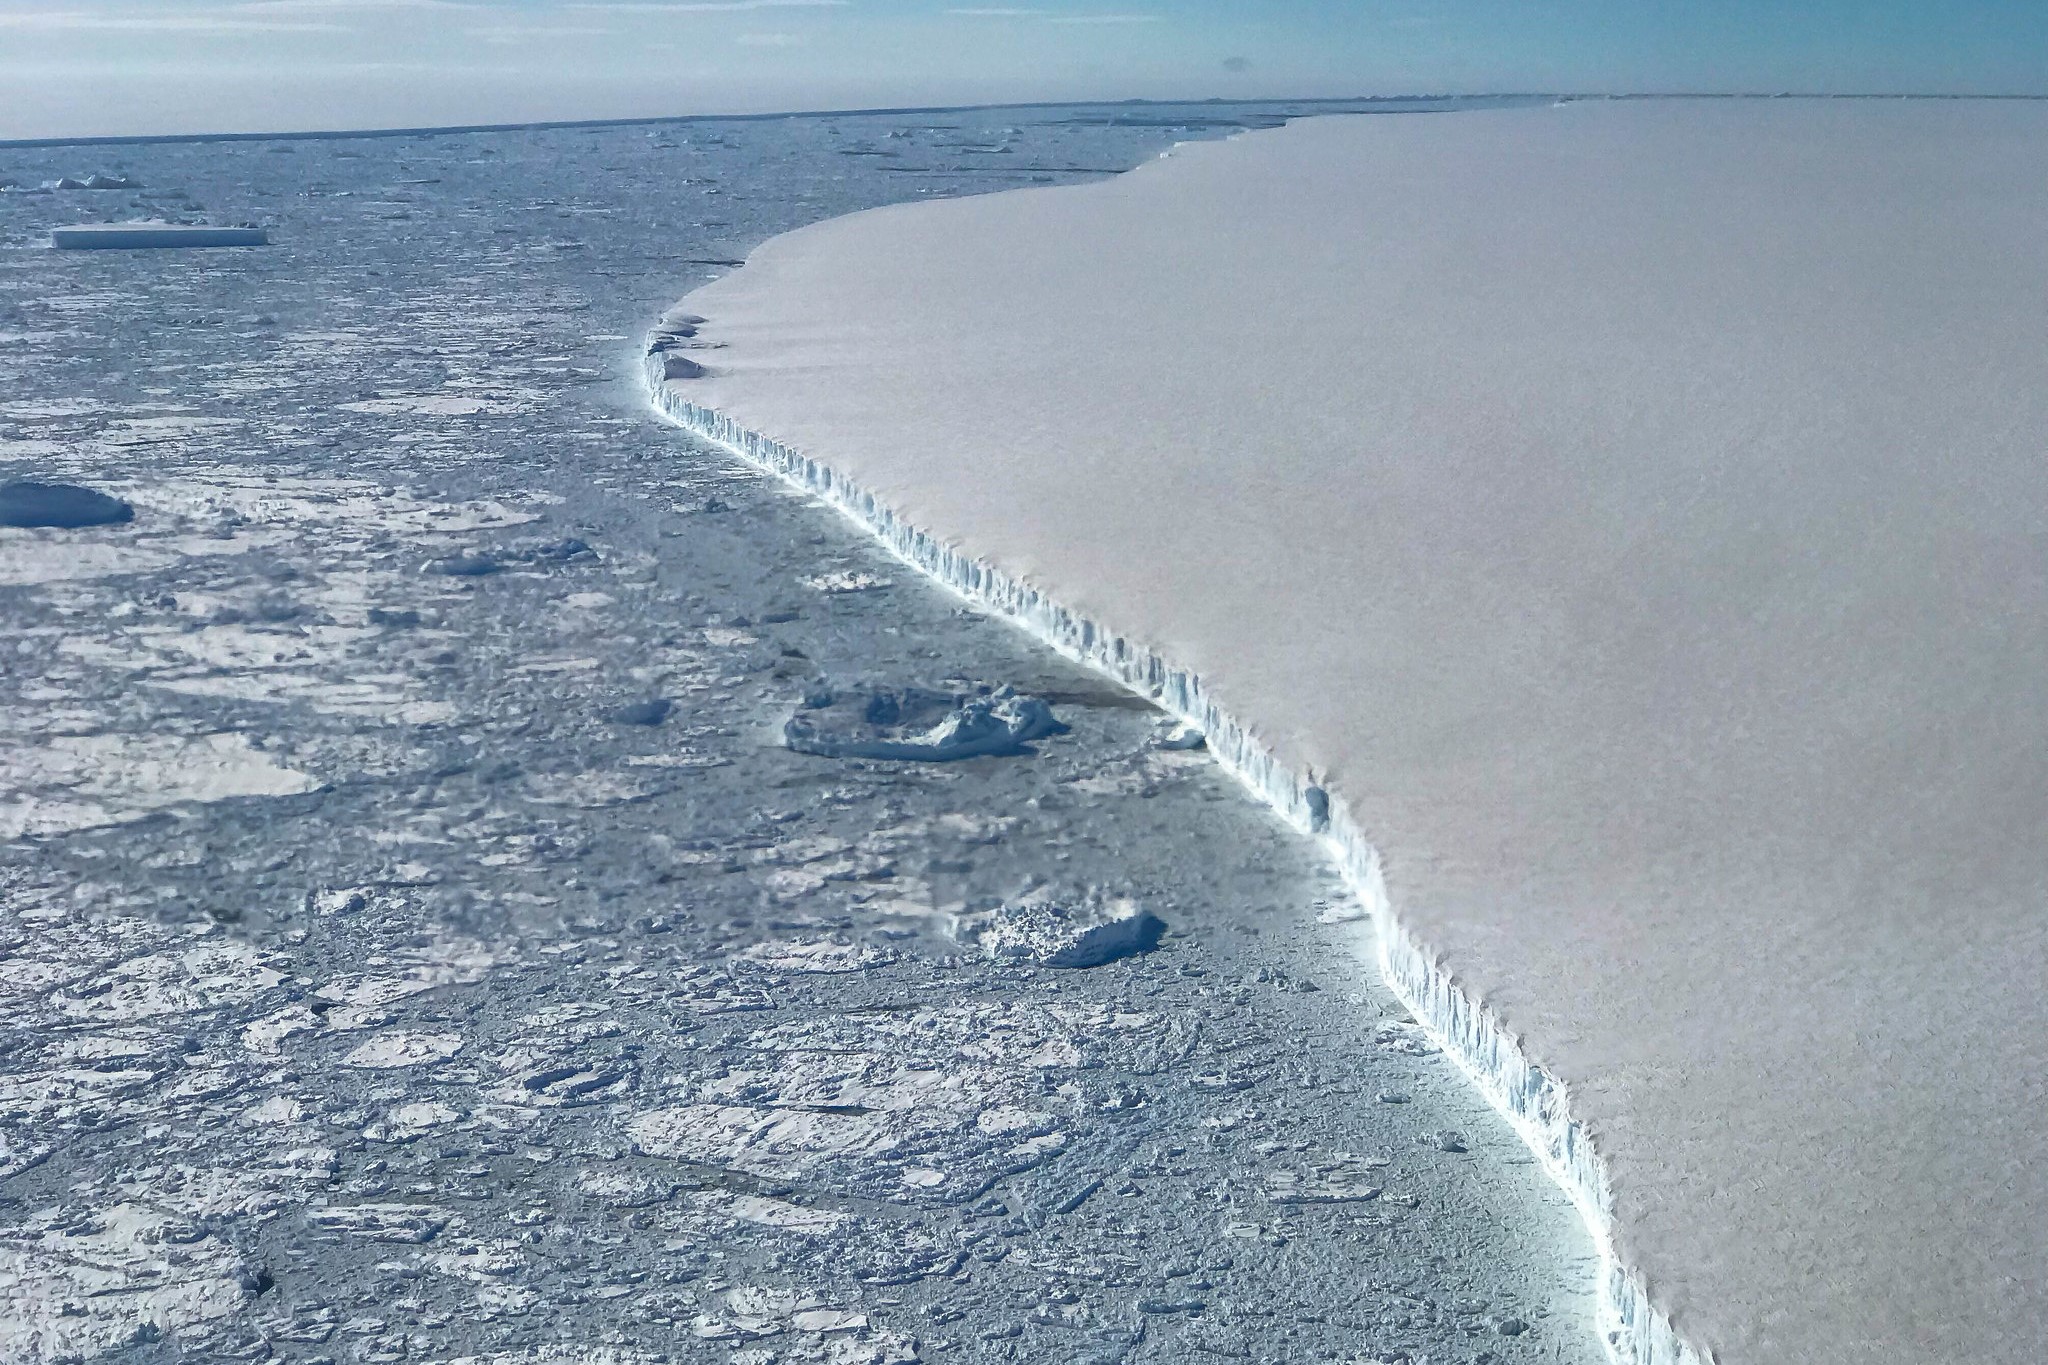 More than 40 percent of Antarctica’s ice shelves have have shrunk since 1997 due to ocean warming at depth. : ‘Operation IceBridge View of Larsen C’ by NASA ICE via Flickr https://flic.kr/p/ZpDZTx CC-BY-2.0